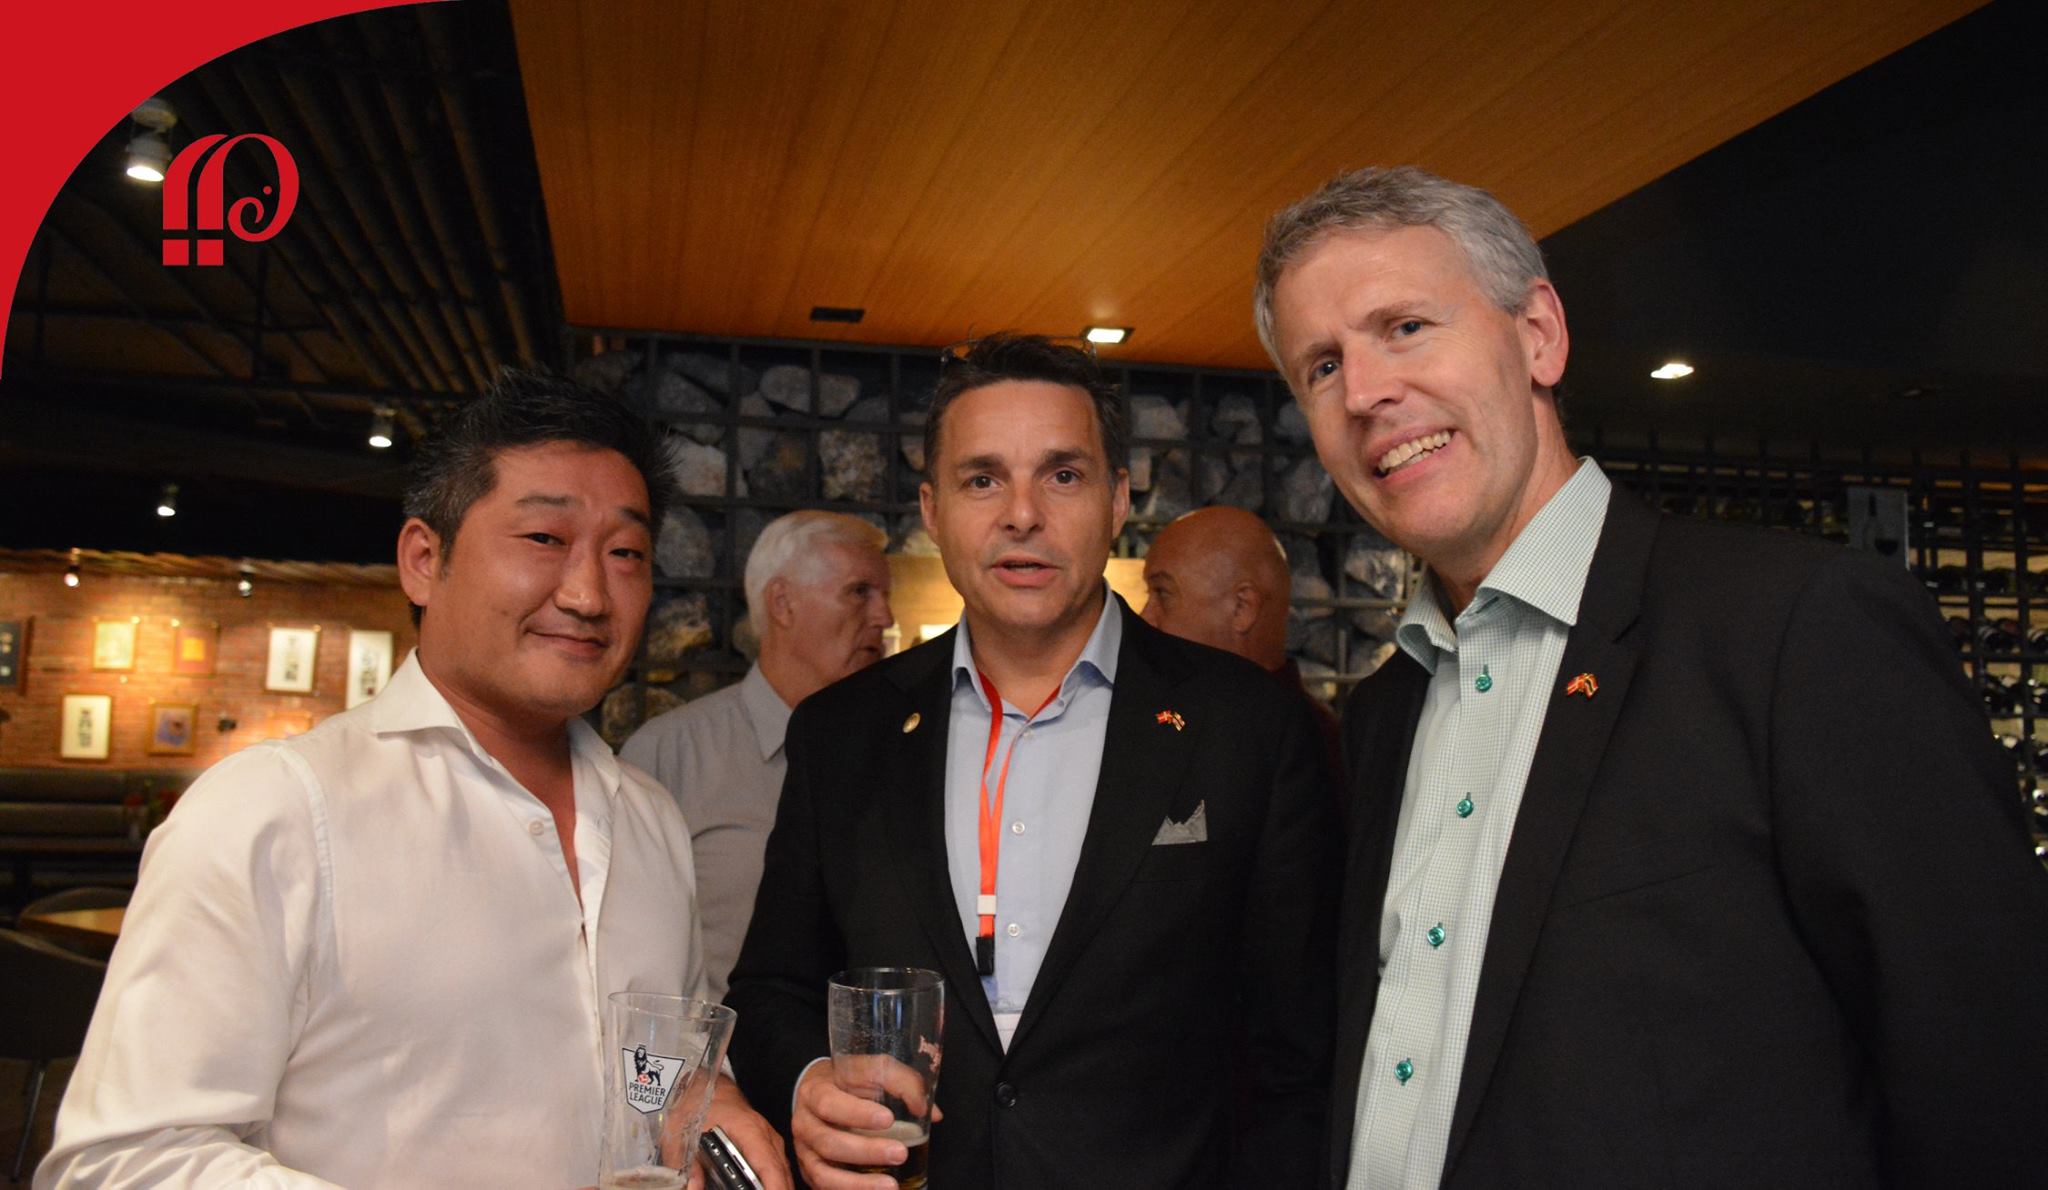 H.E. Mr. Uffe Wolffhechel, (right) new Ambassador of Denmark to Thailand, with Dancham President Mr. Thomas Nyborg (middle) and Mr. Peter Waagensen, prominent Danish businessman in Thailand at the DTCC Networking nigh 23 September 2016 at Admiral's Pub and Restaurant Bangkok.